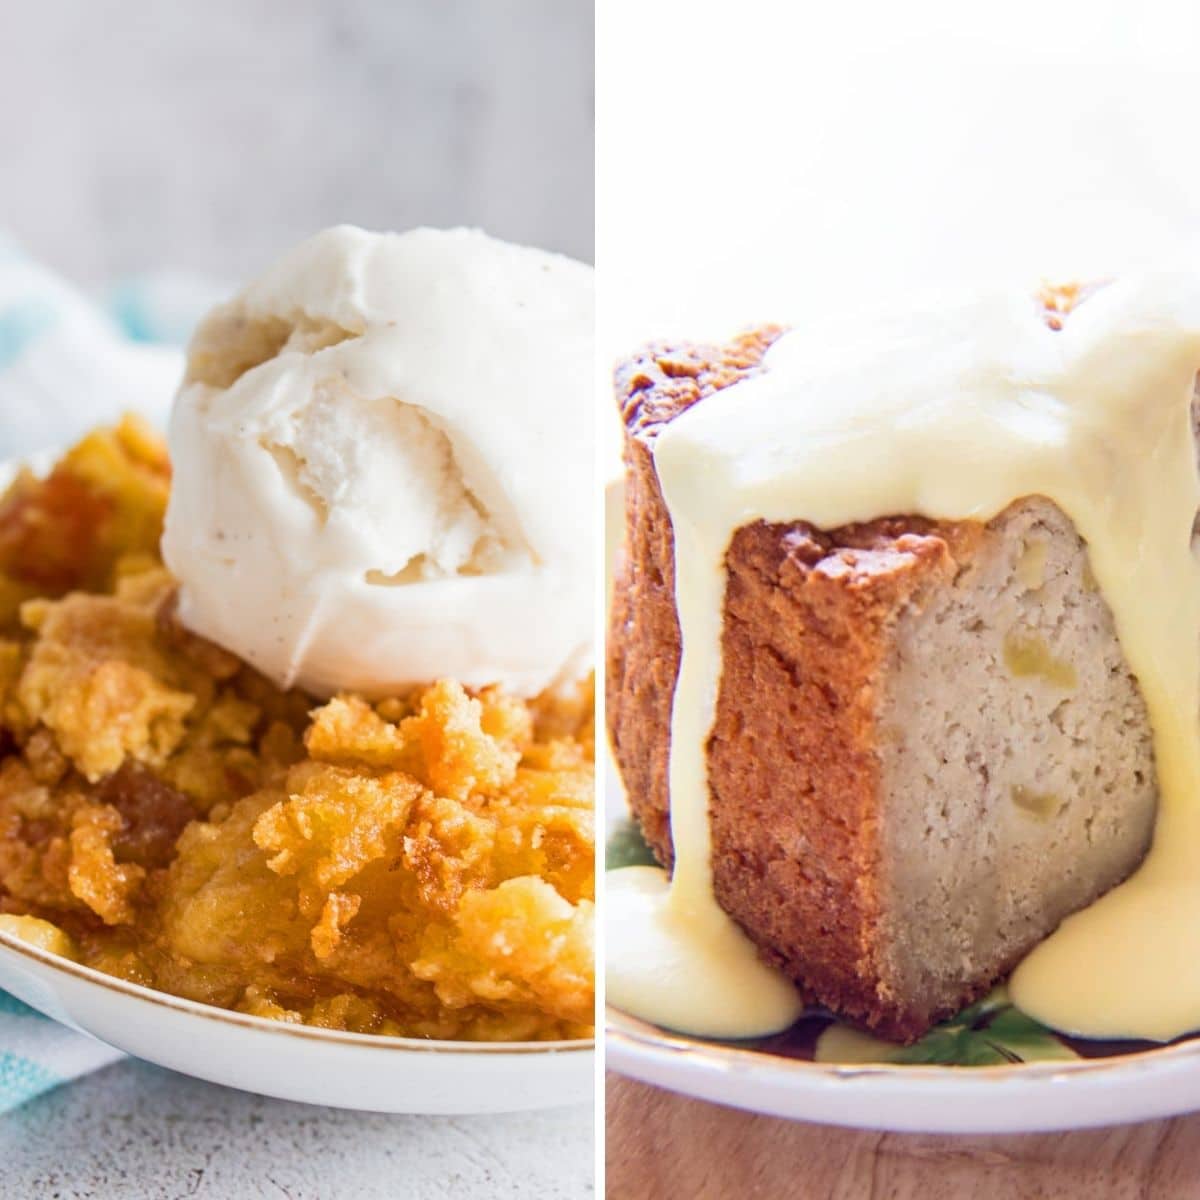 Best apple cake recipes to bake any time of the year featuring two favorite recipes side by side.